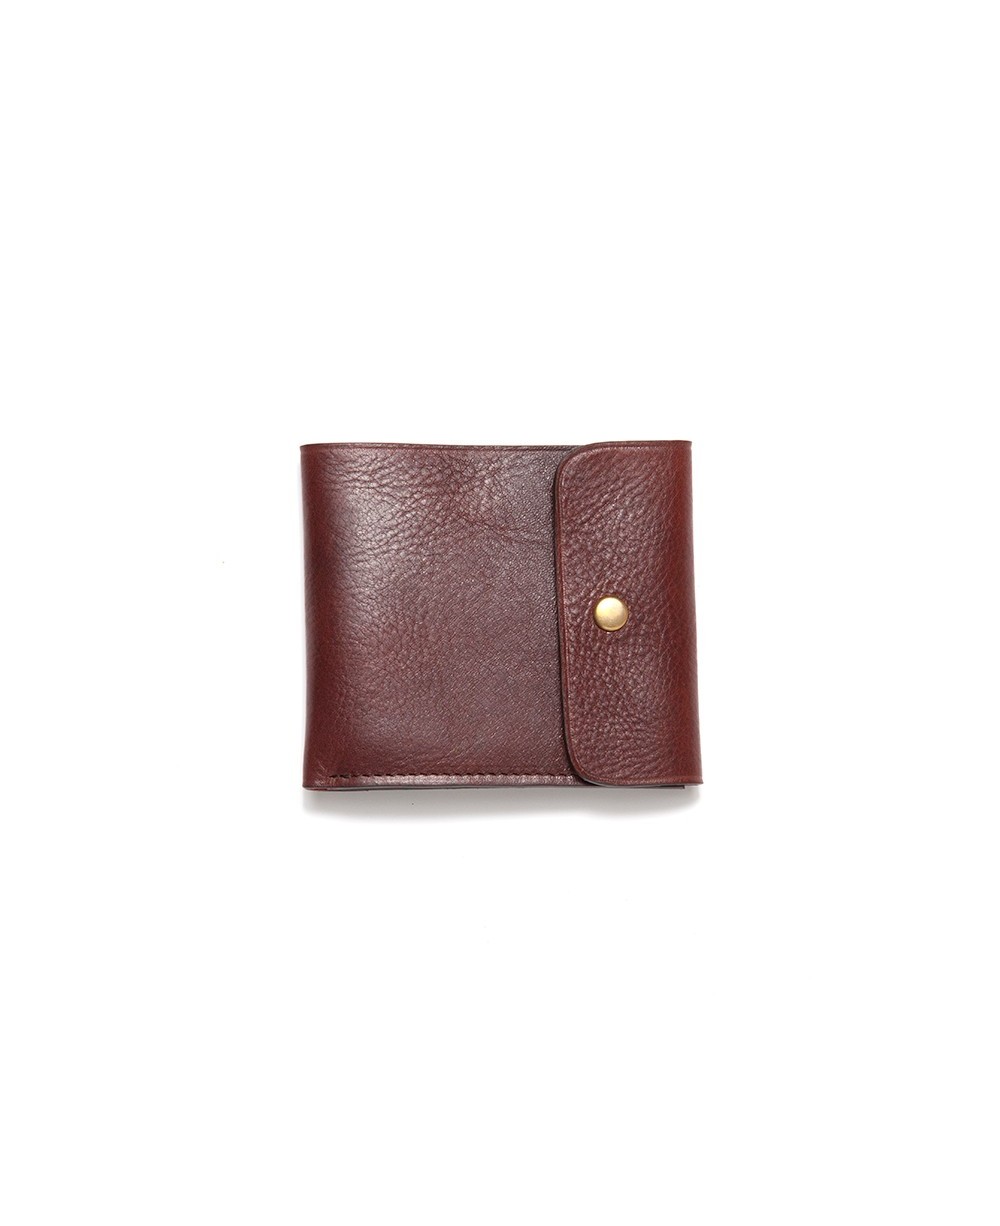 Card and money Wallet